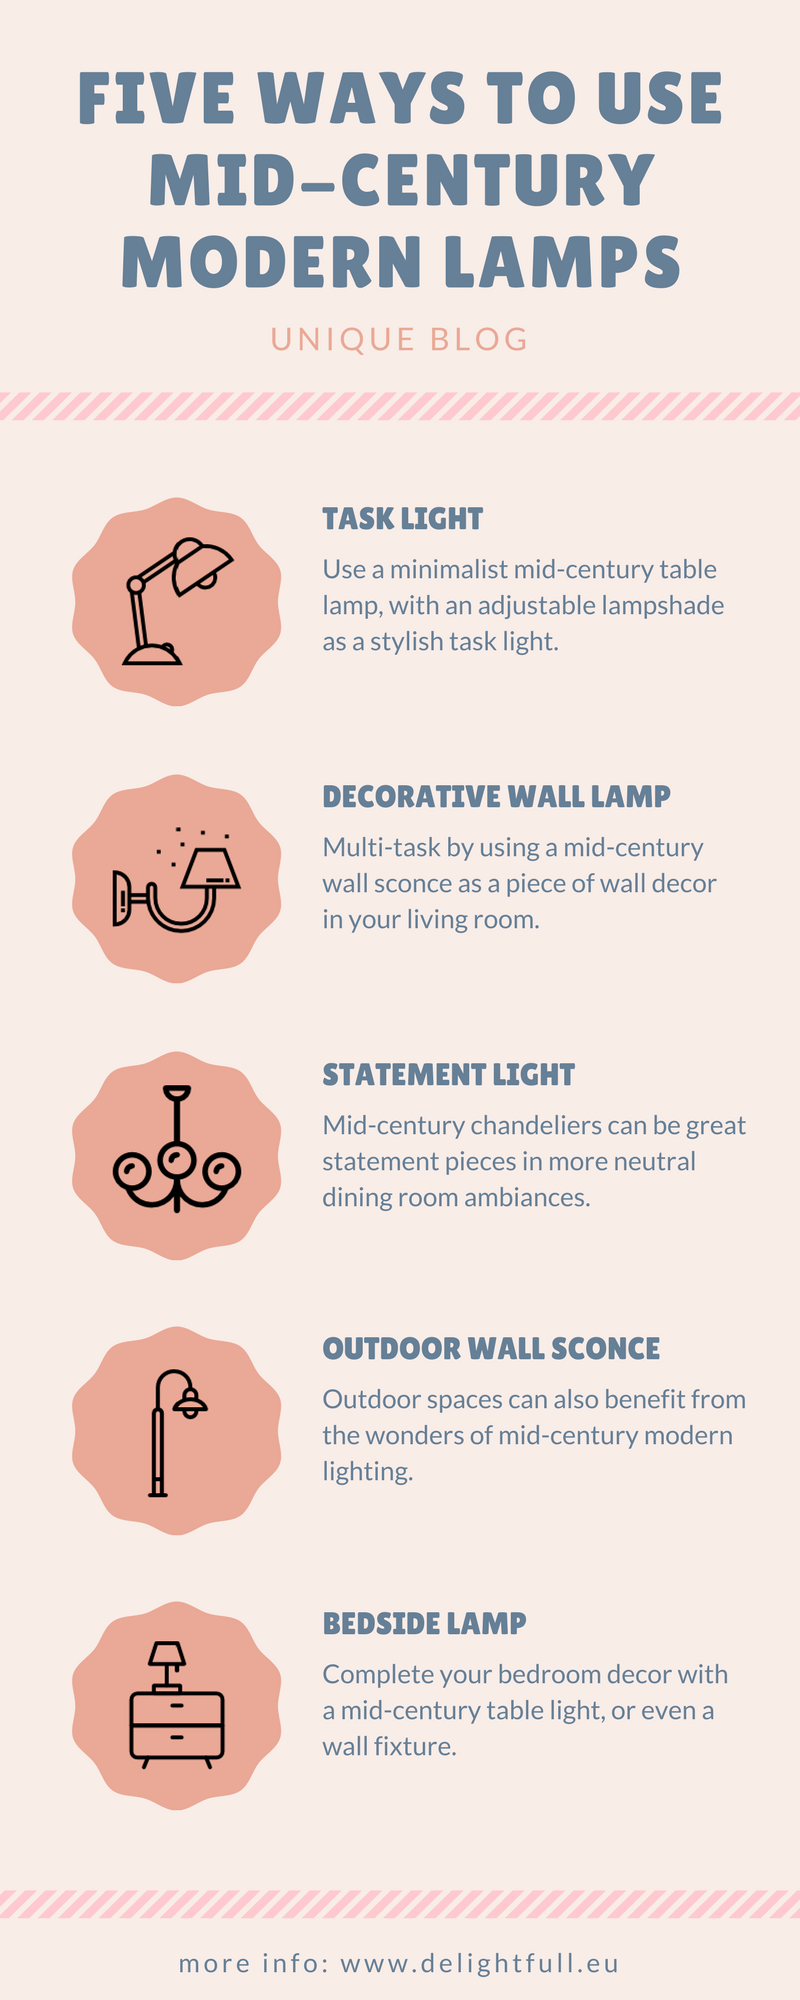 Learn How To Clean Your Mid-Century Modern Lights Like A Pro ➤ To see more news about the Best Design Projects in the world visit us at http://www.bestdesignprojects.com #homedecor #interiordesign #bestdesignprojects @bocadolobo @delightfulll @brabbu @essentialhomeeu @circudesign @mvalentinabath @luxxu @covethouse_